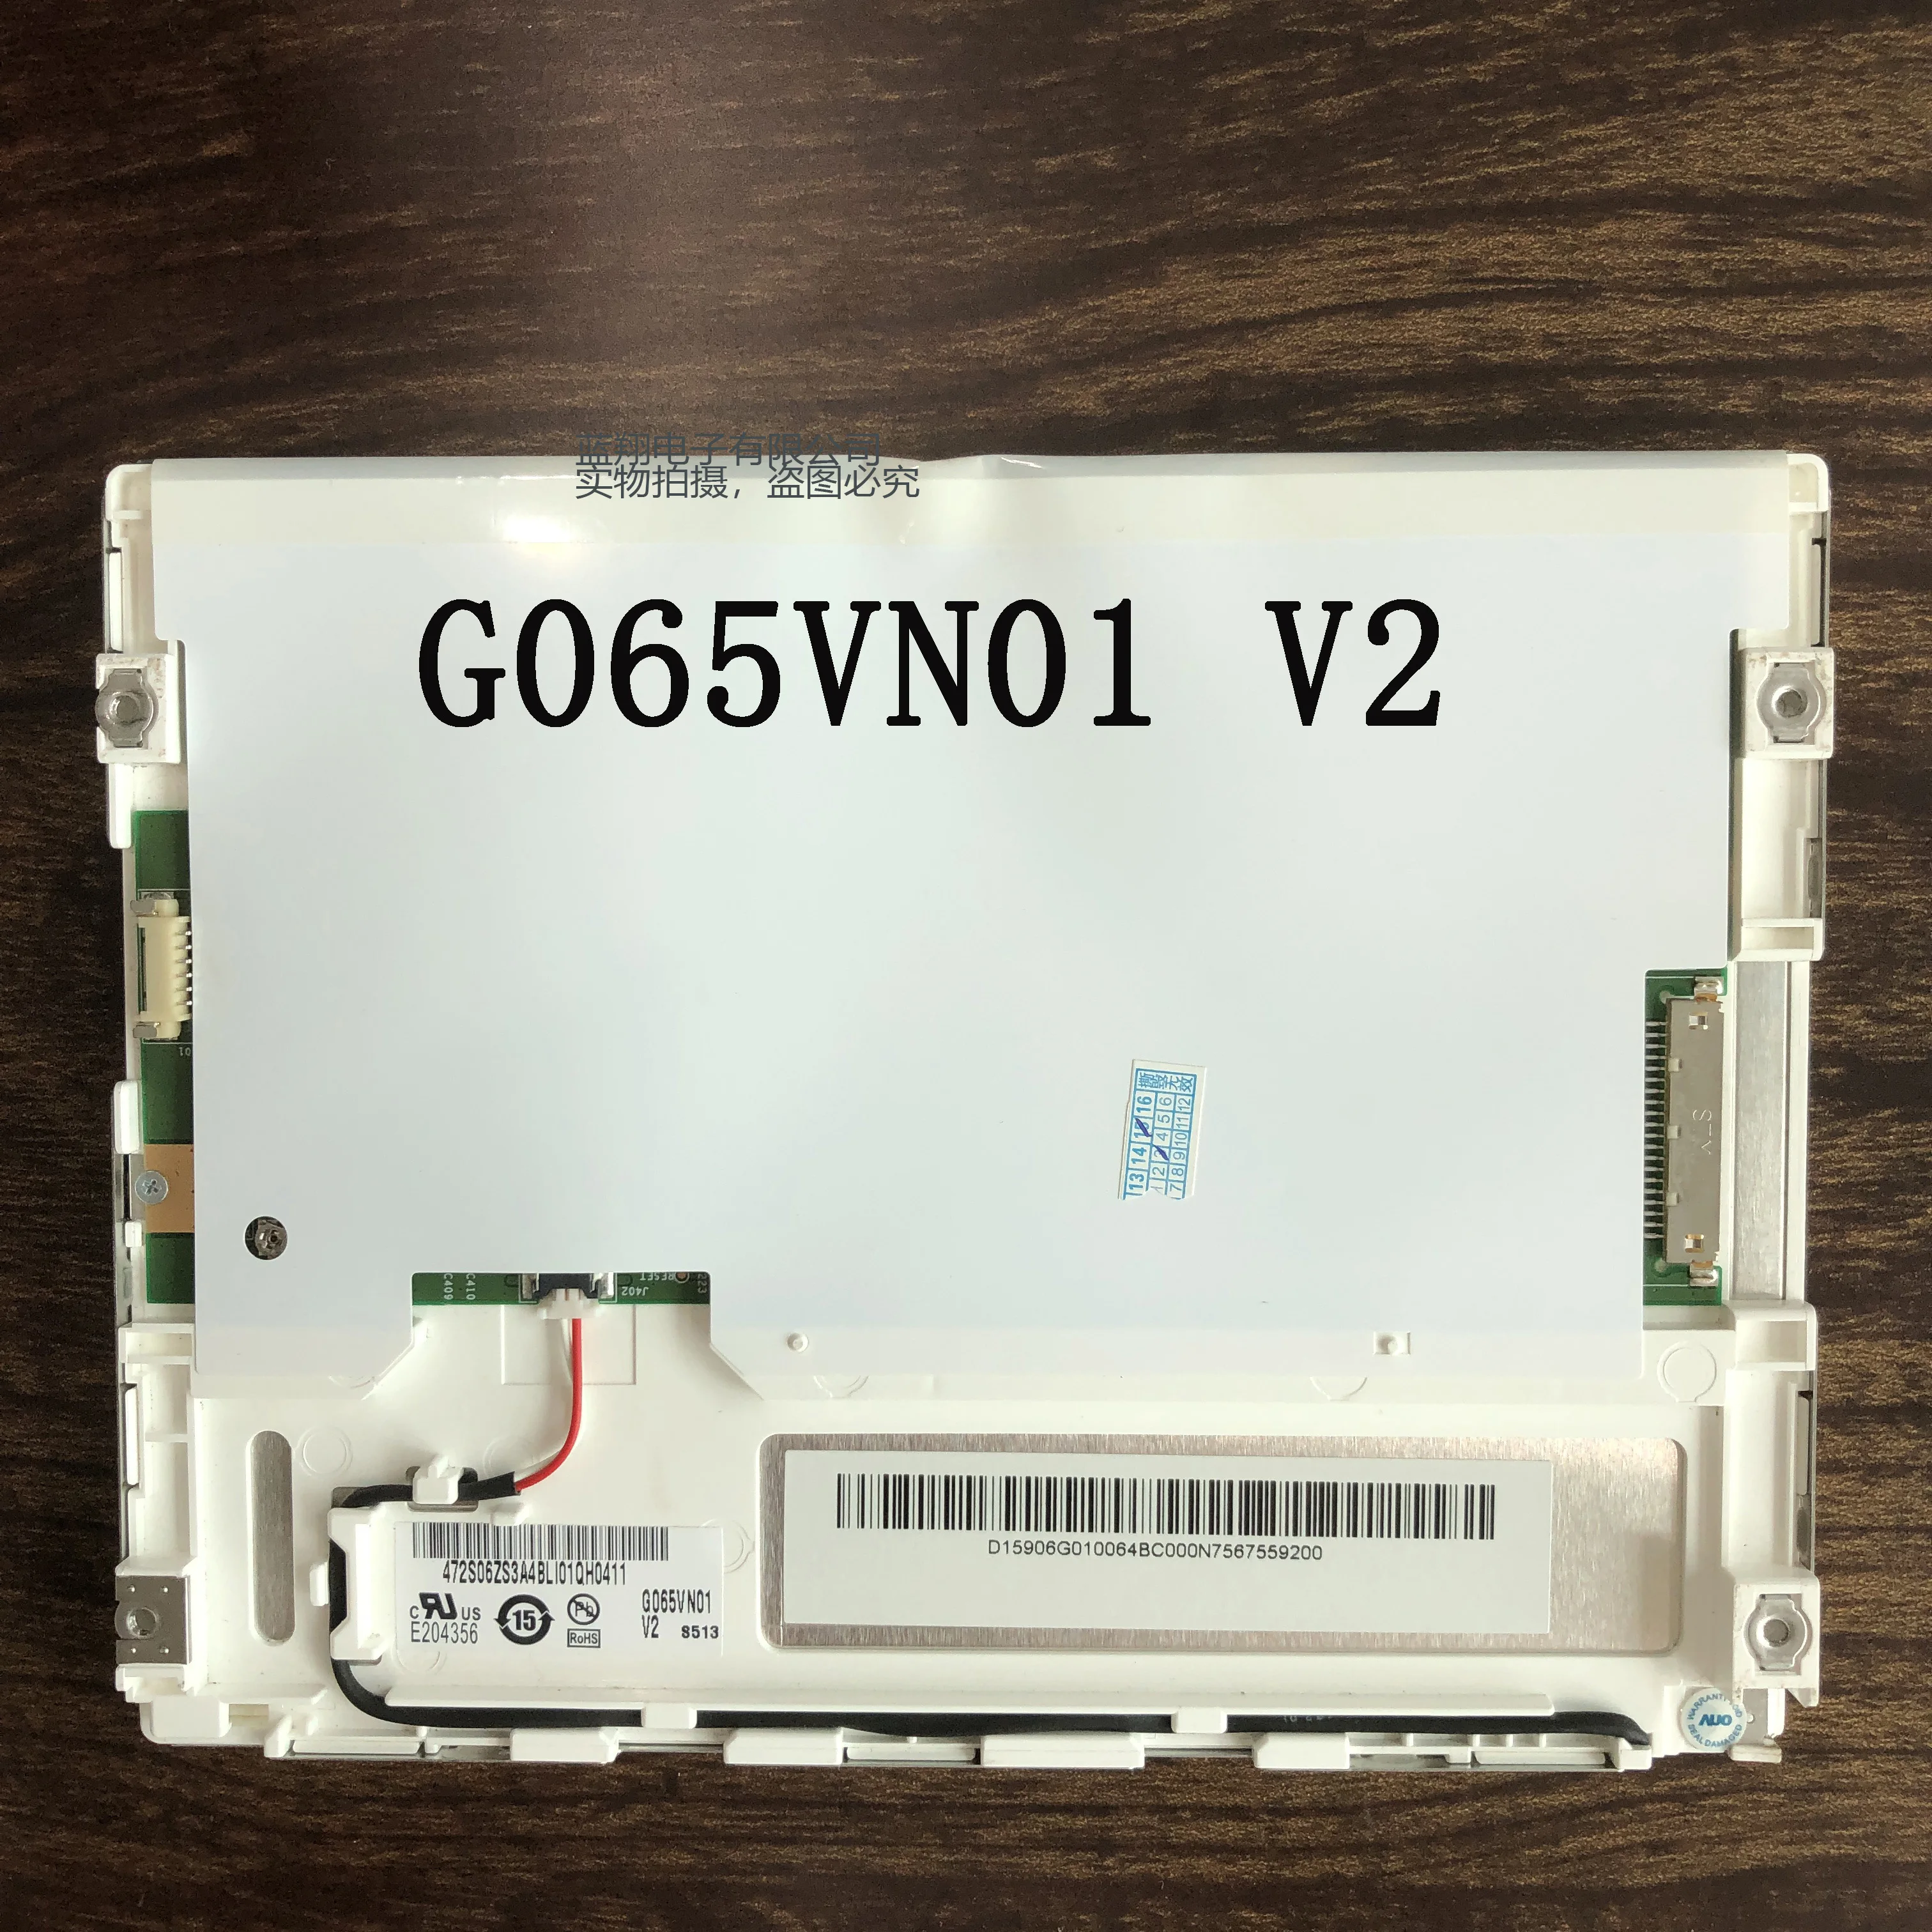 

Free Shipping New Grade A+ 6.5" inch LCD Display Screen Panel For AUO G065VN01 V.2 G065VN01 V2